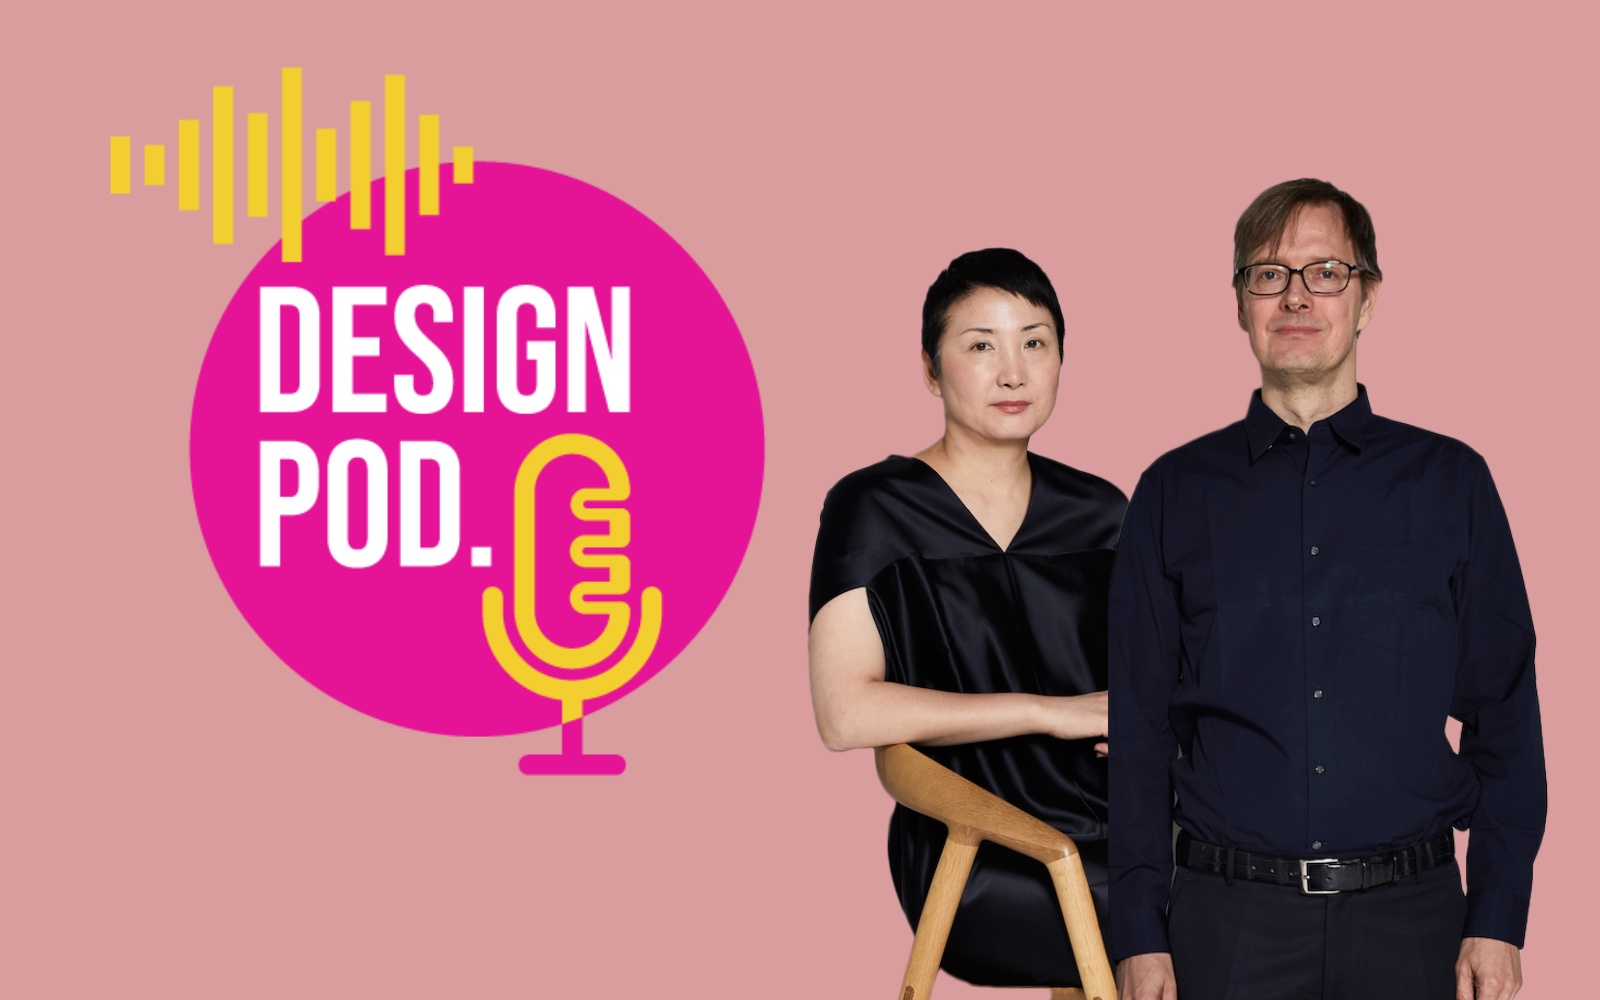 Image of INODA+SVEJE in front of pink background and the DESIGN POD logo